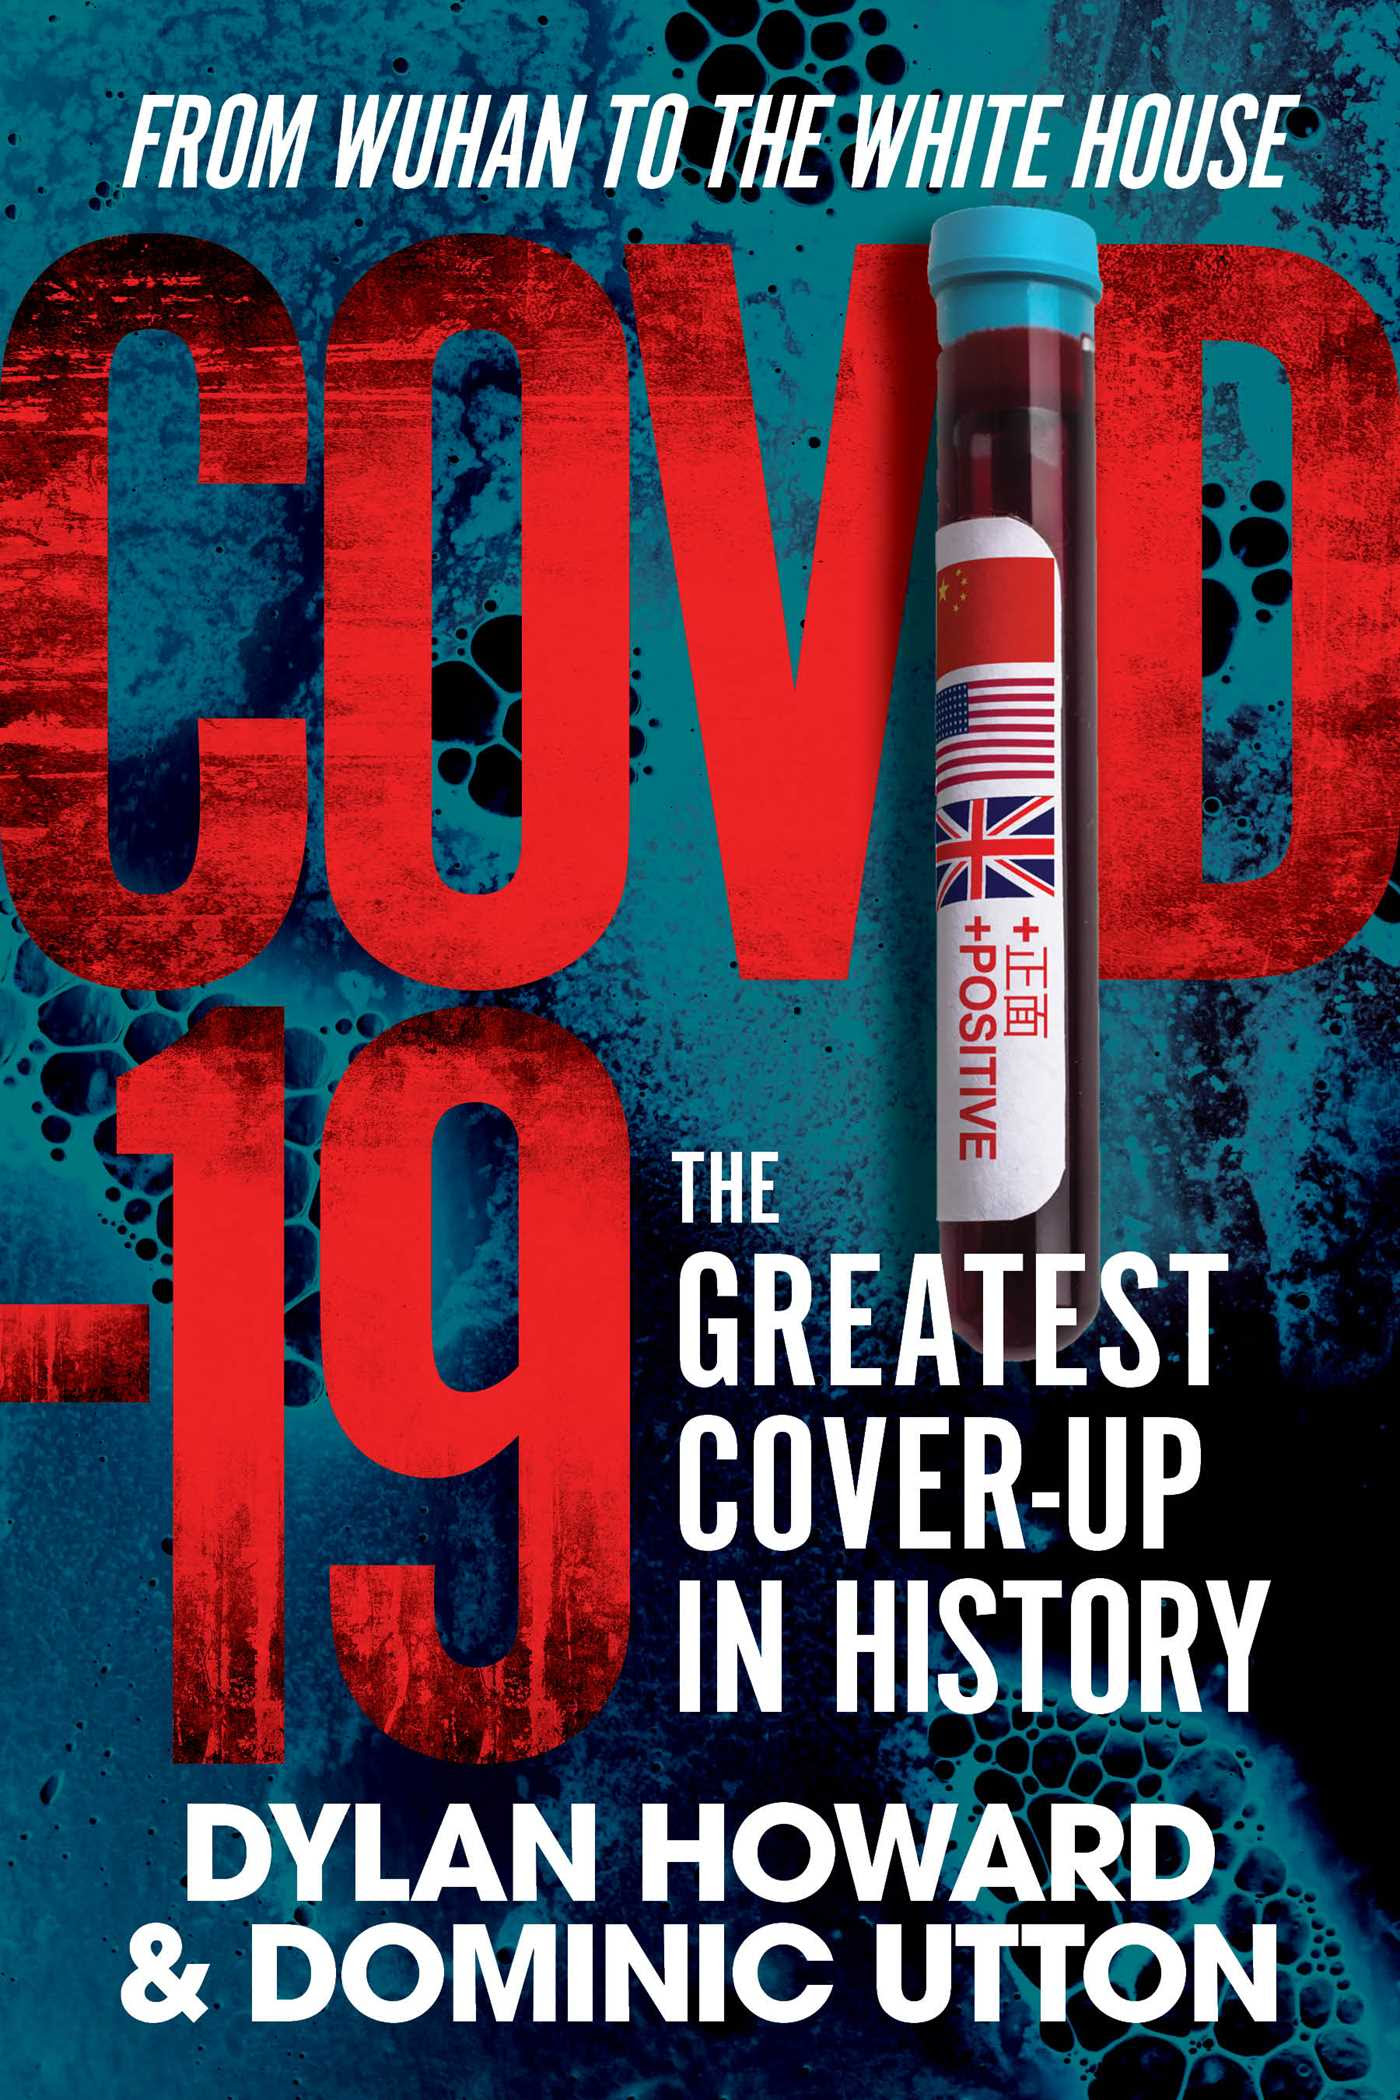 COVID-19: The Greatest Cover-Up in History?From Wuhan to the White House PDF